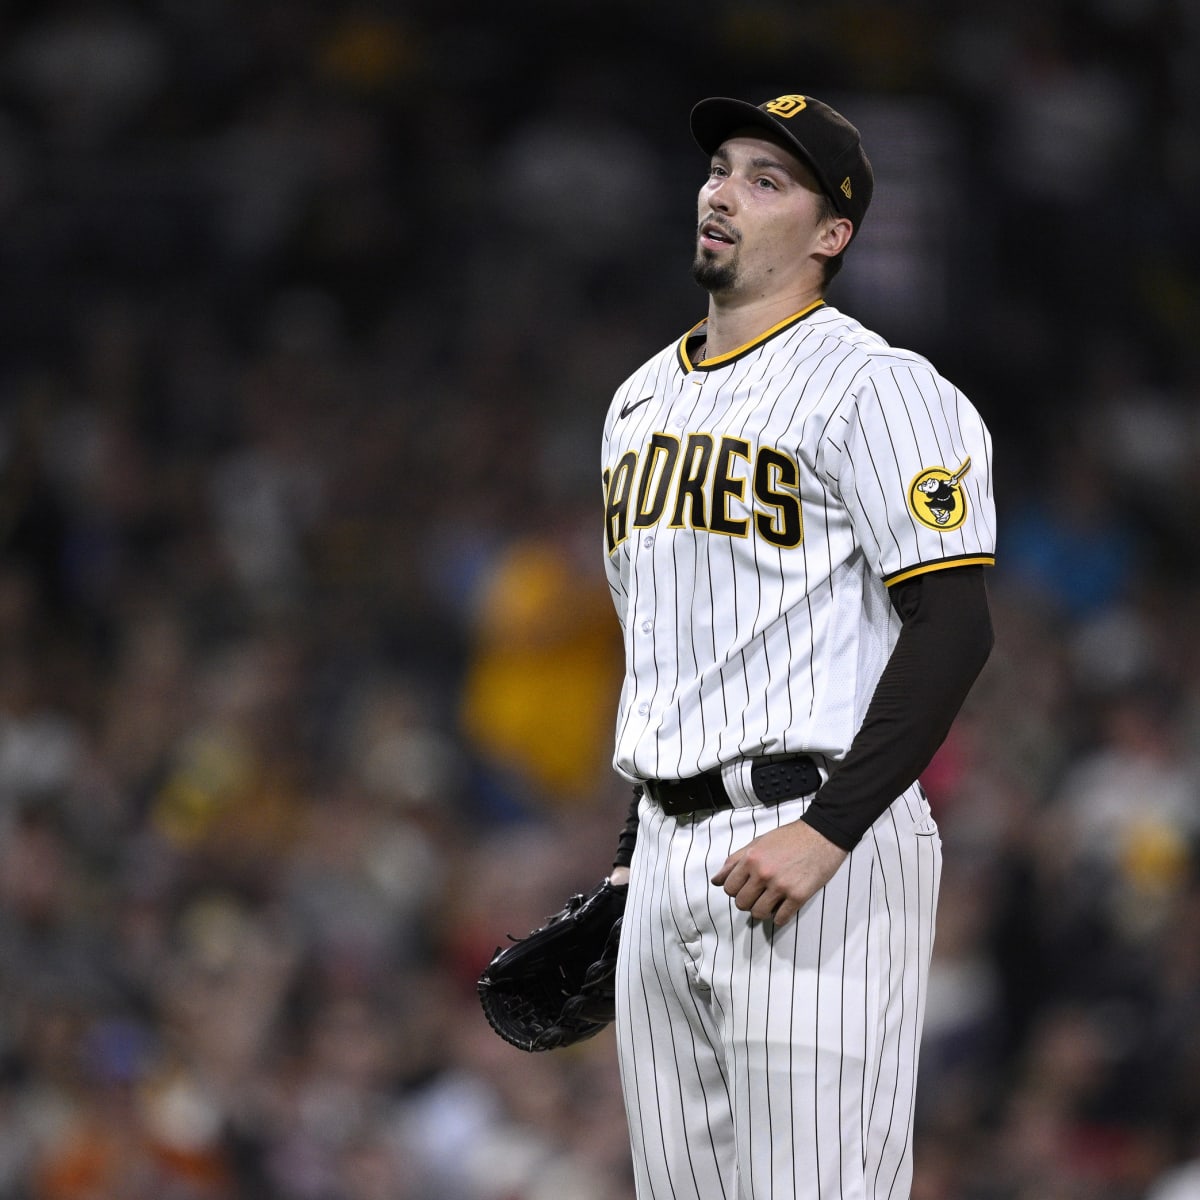 Padres' Blake Snell got grandmother, 96, into NLCS at Petco - The